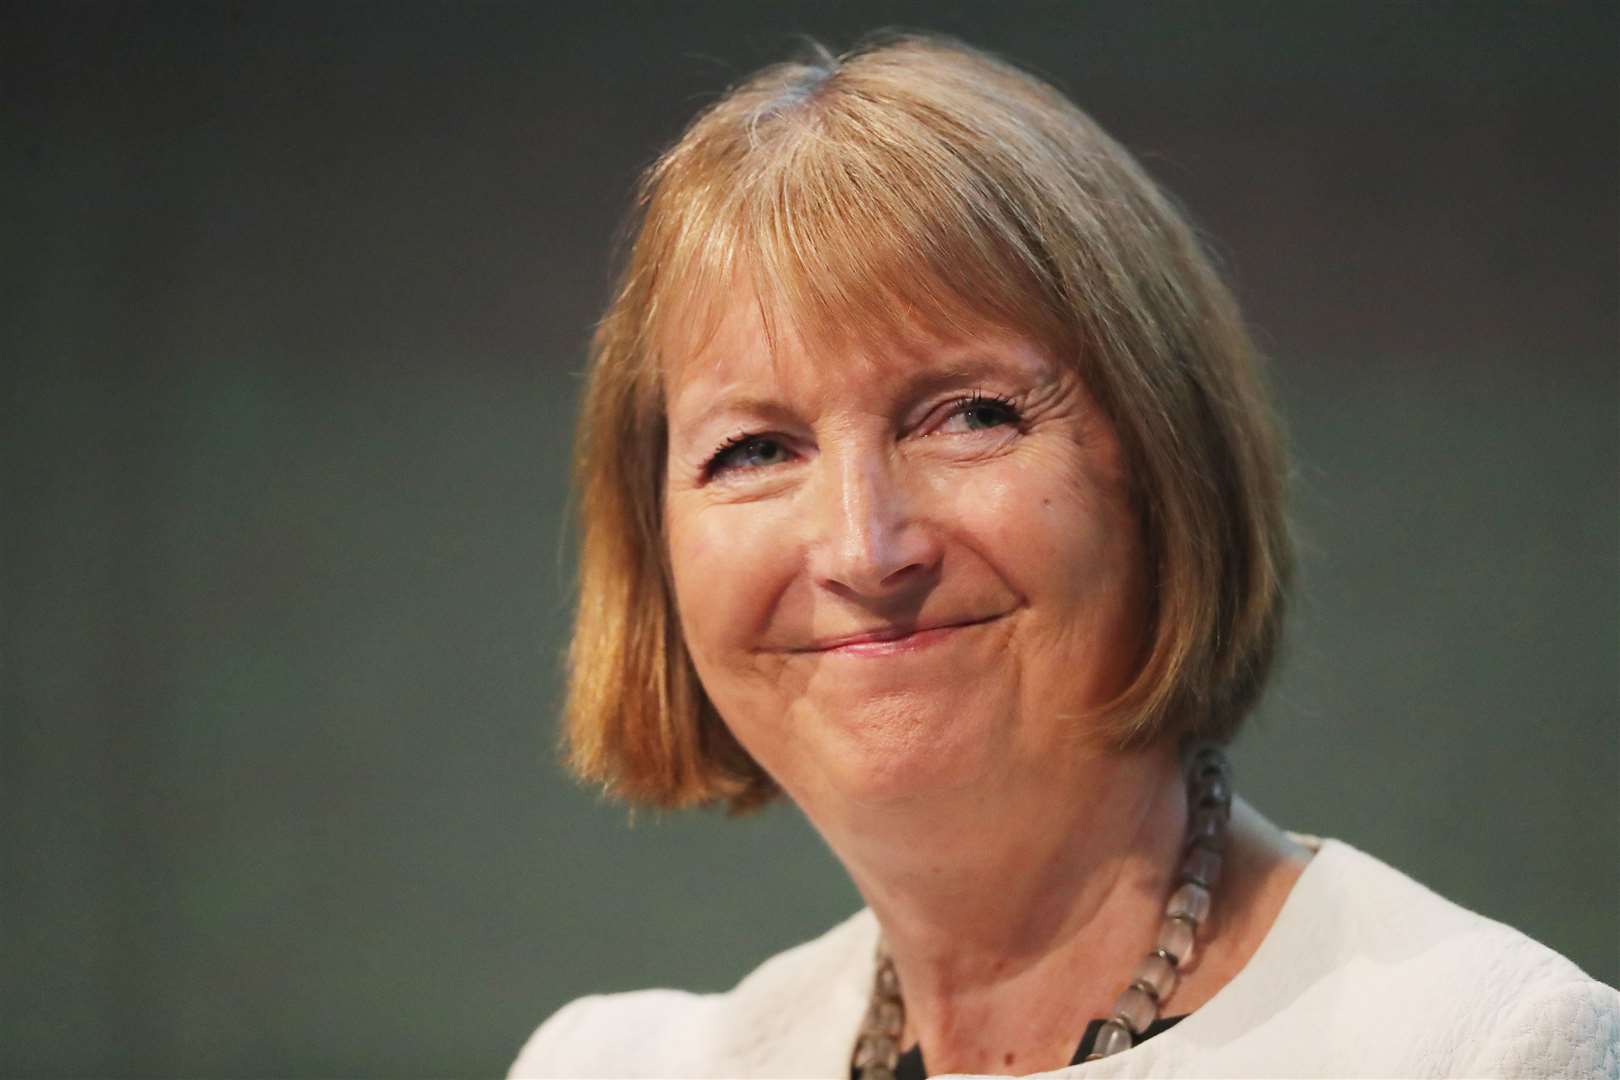 Jess Phillips credits female MPs such as Harriet Harman with helping to create a system that enabled young mothers to keep working (Niall Carson/PA)